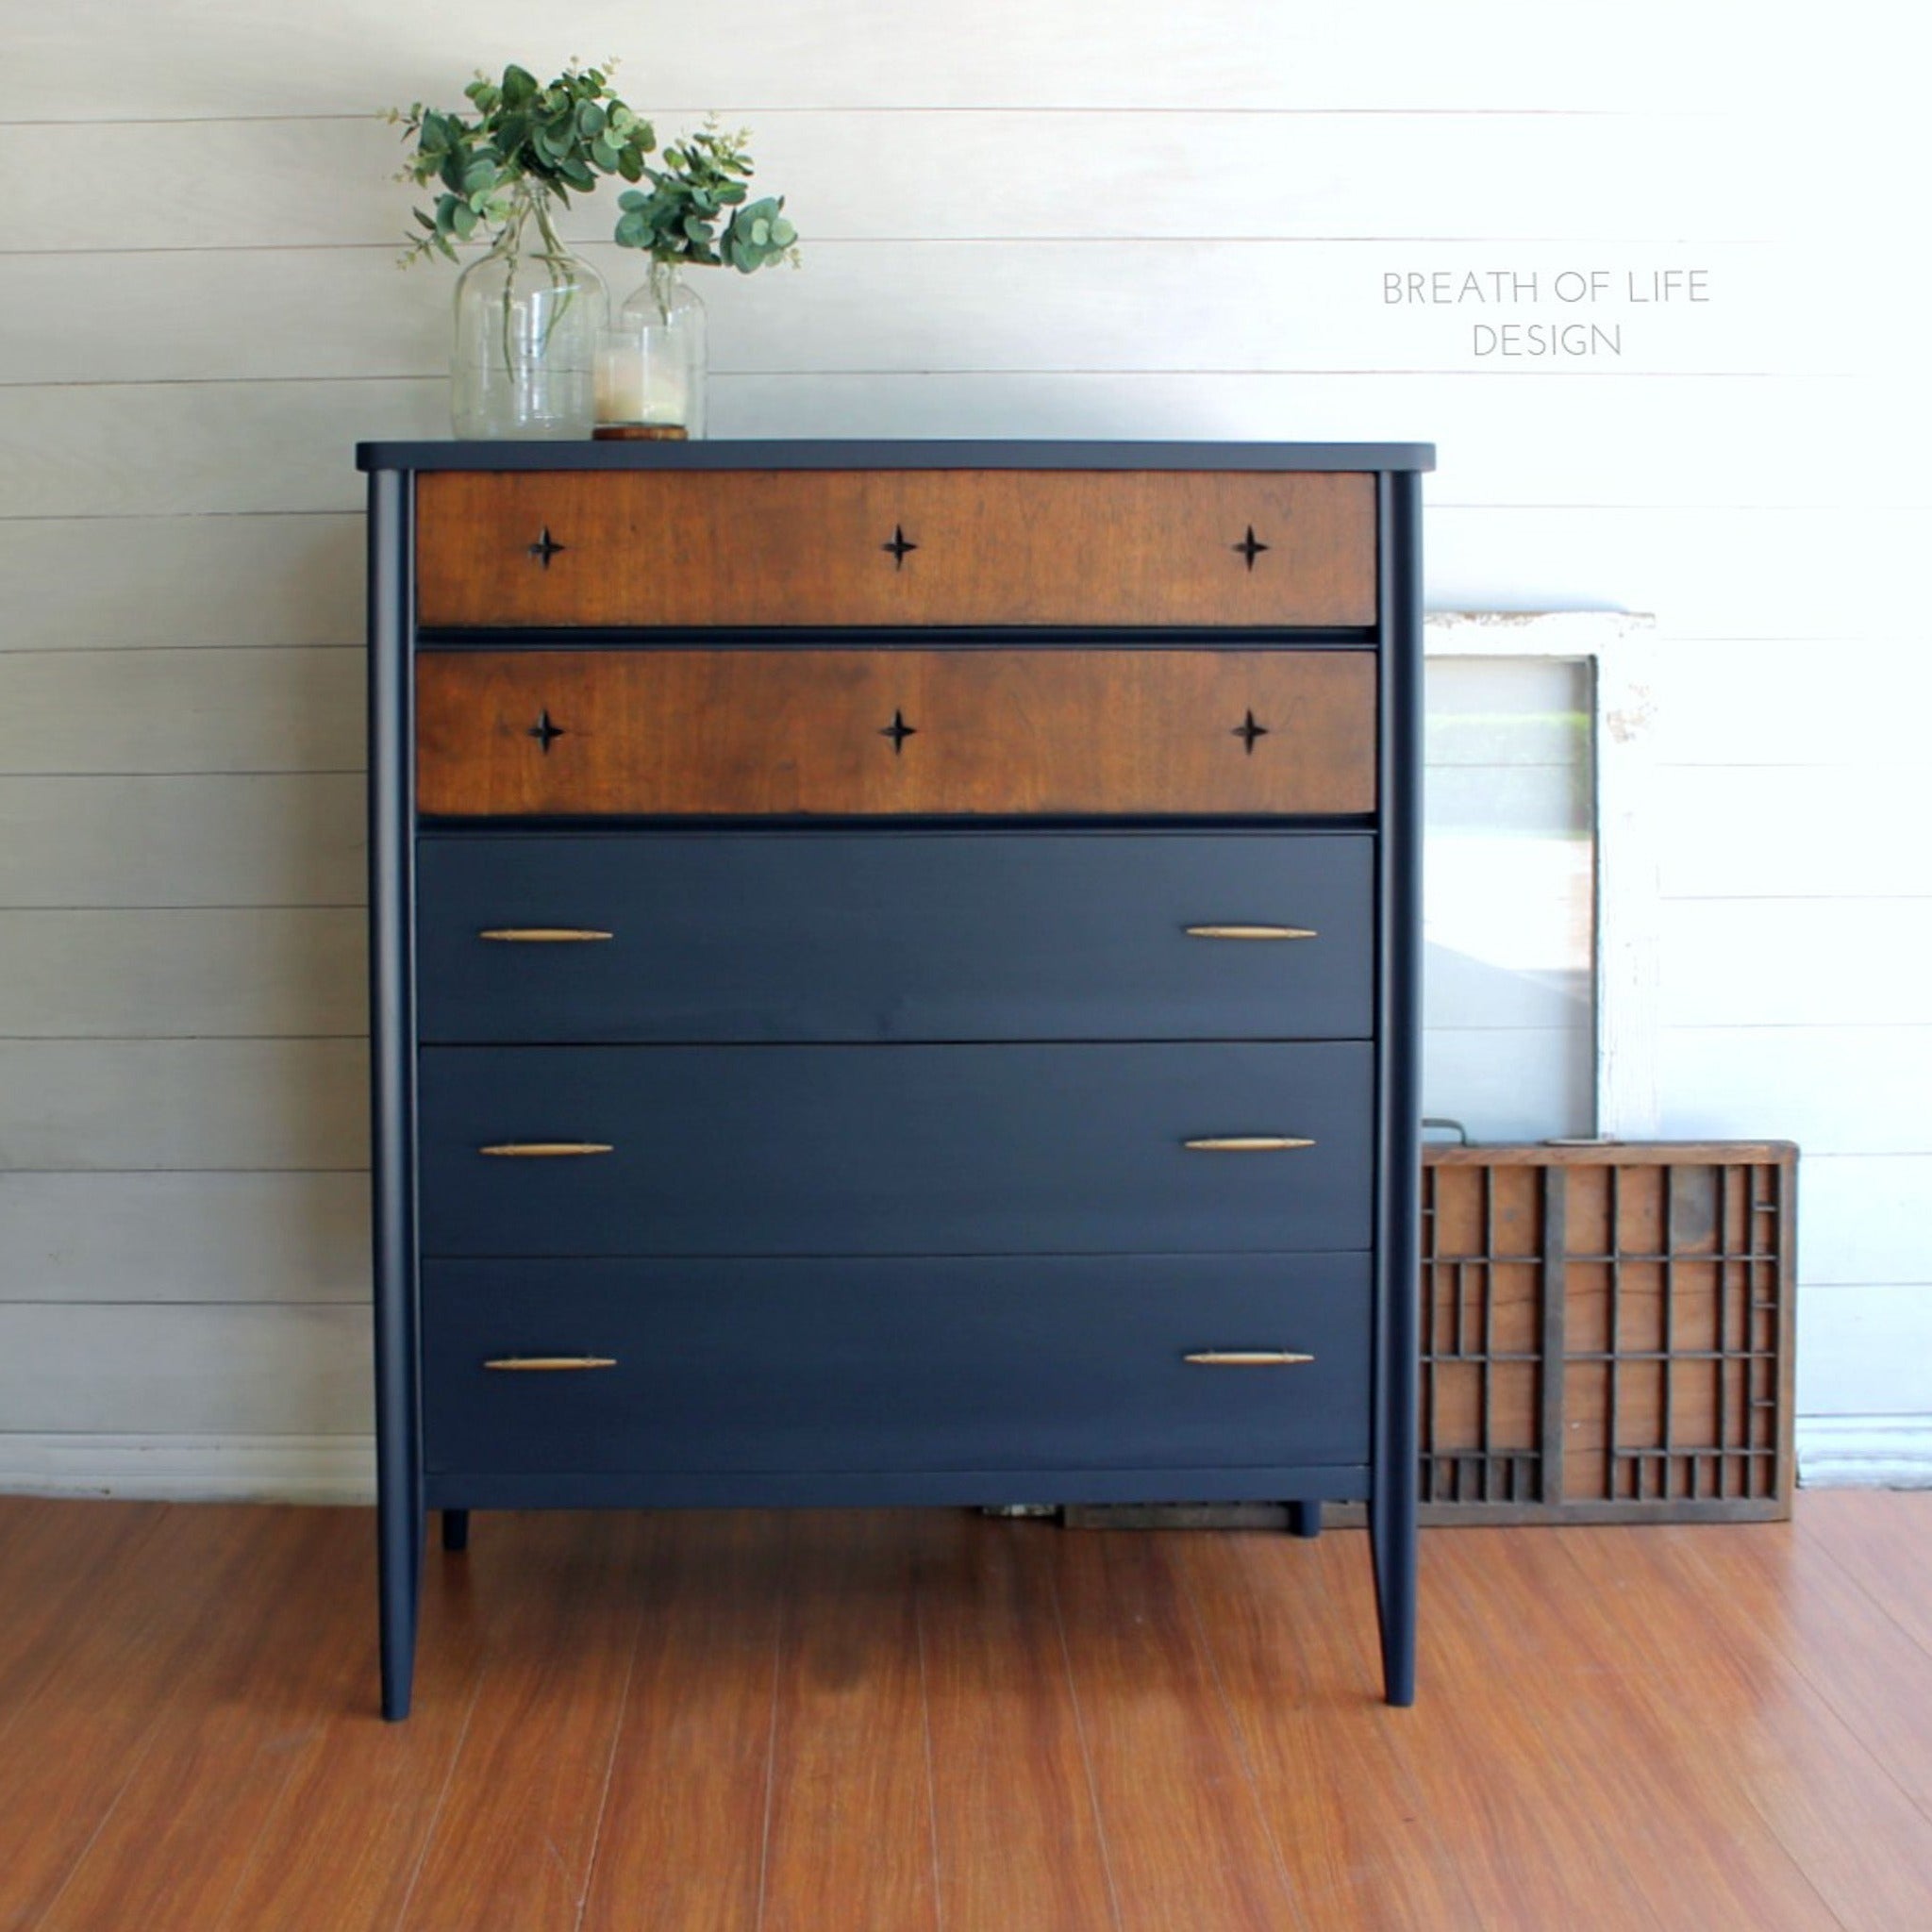 A 5-drawer chest dresser refurbished by Breath of Life Design is painted in Dixie Belle's In the Navy chalk mineral paint and the top 2 drawers are stained a natural wood color.